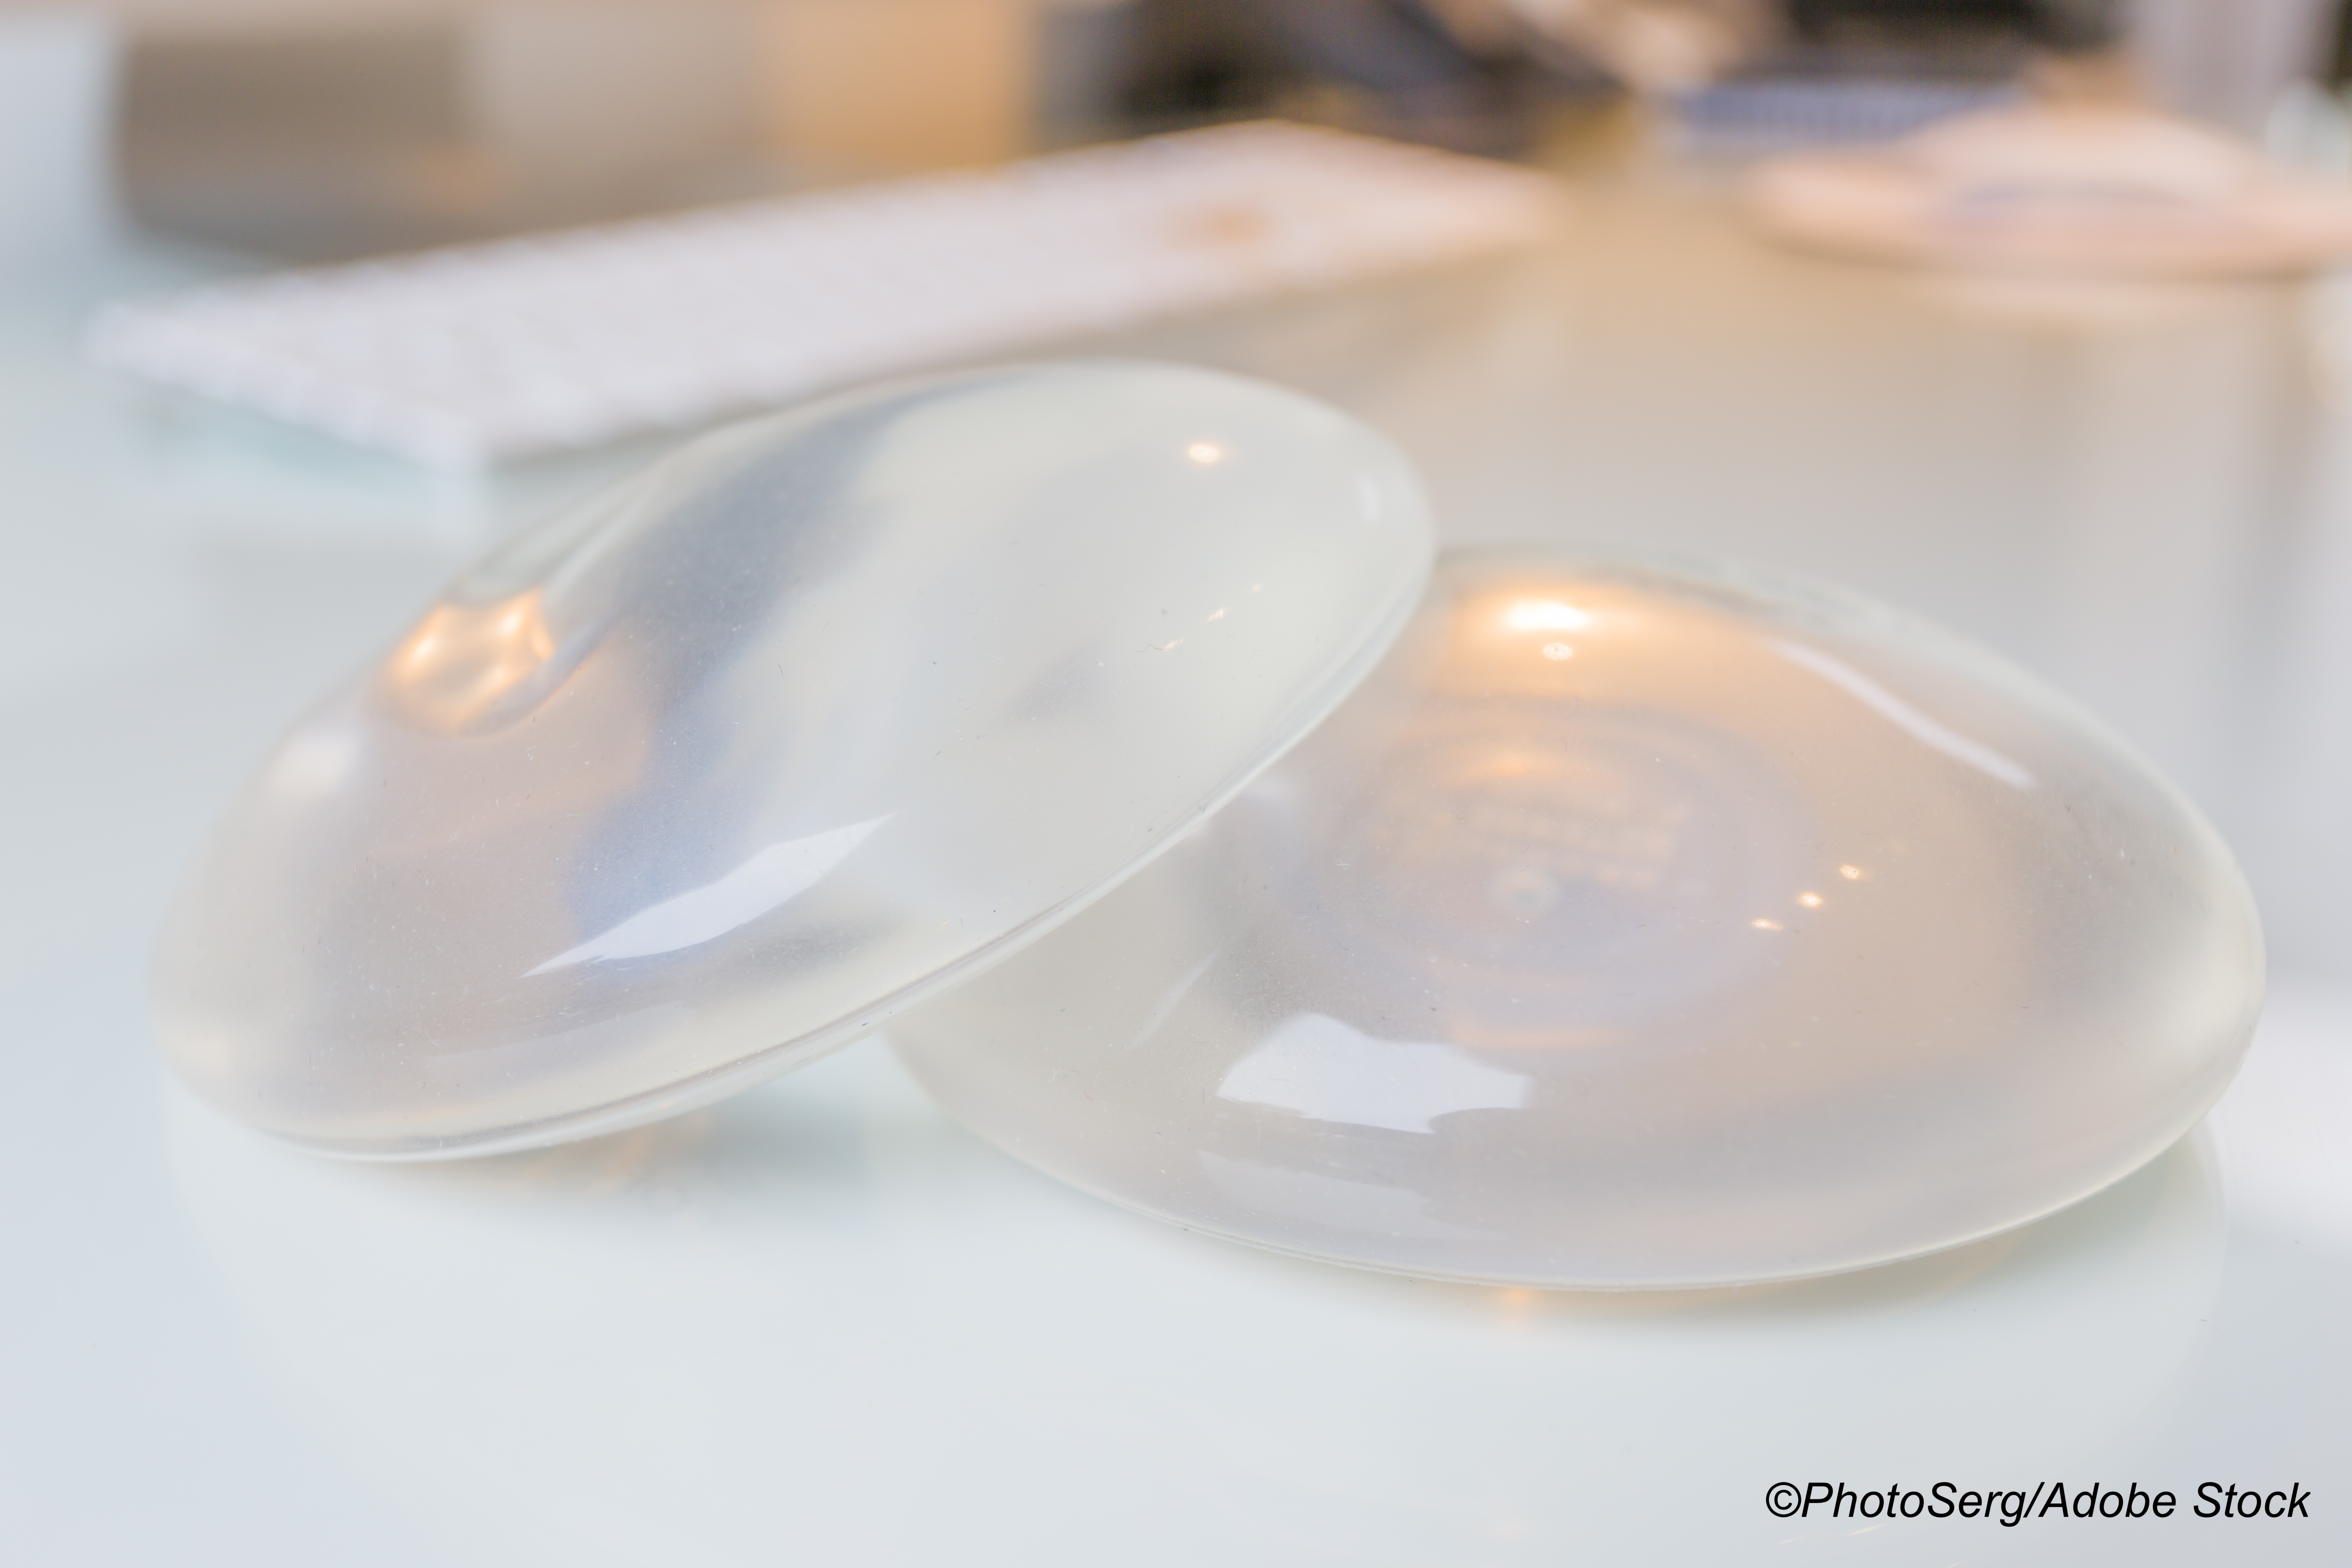 Silicone Leakage Common with “Gummy Bear” Breast Implants
